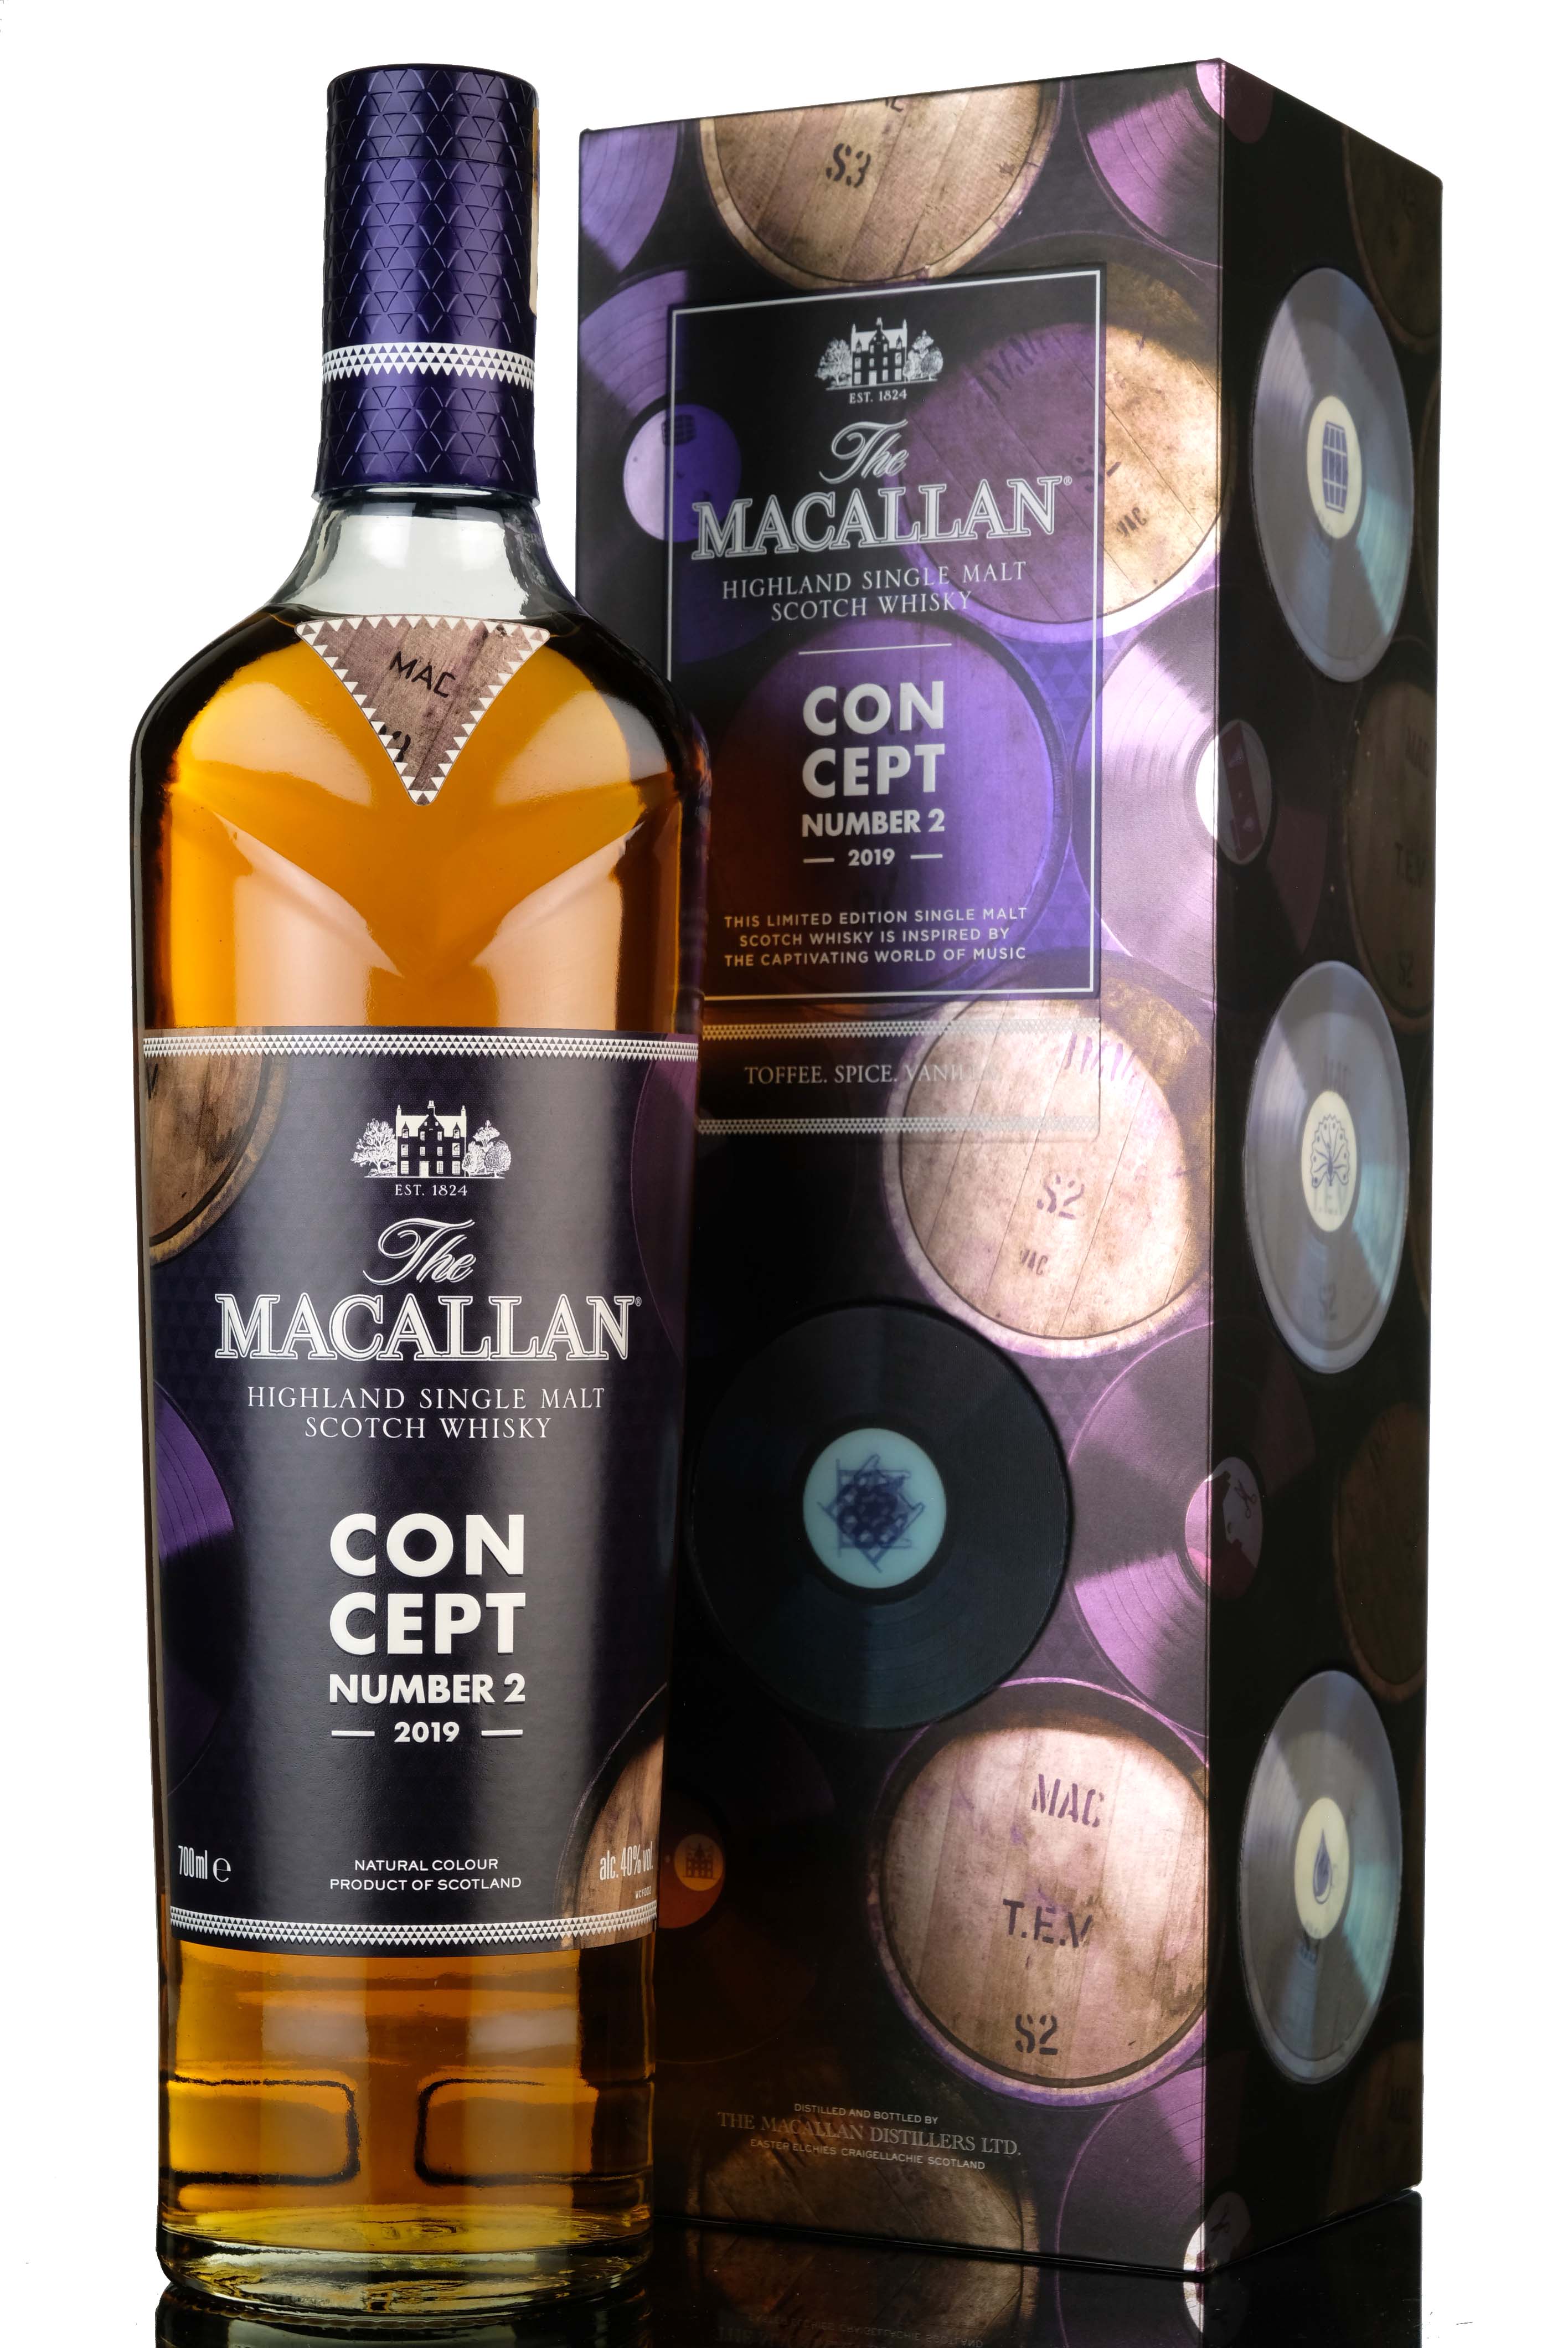 Macallan Concept Number 2 - The Captivating World Of Music - Limited Edition 2019